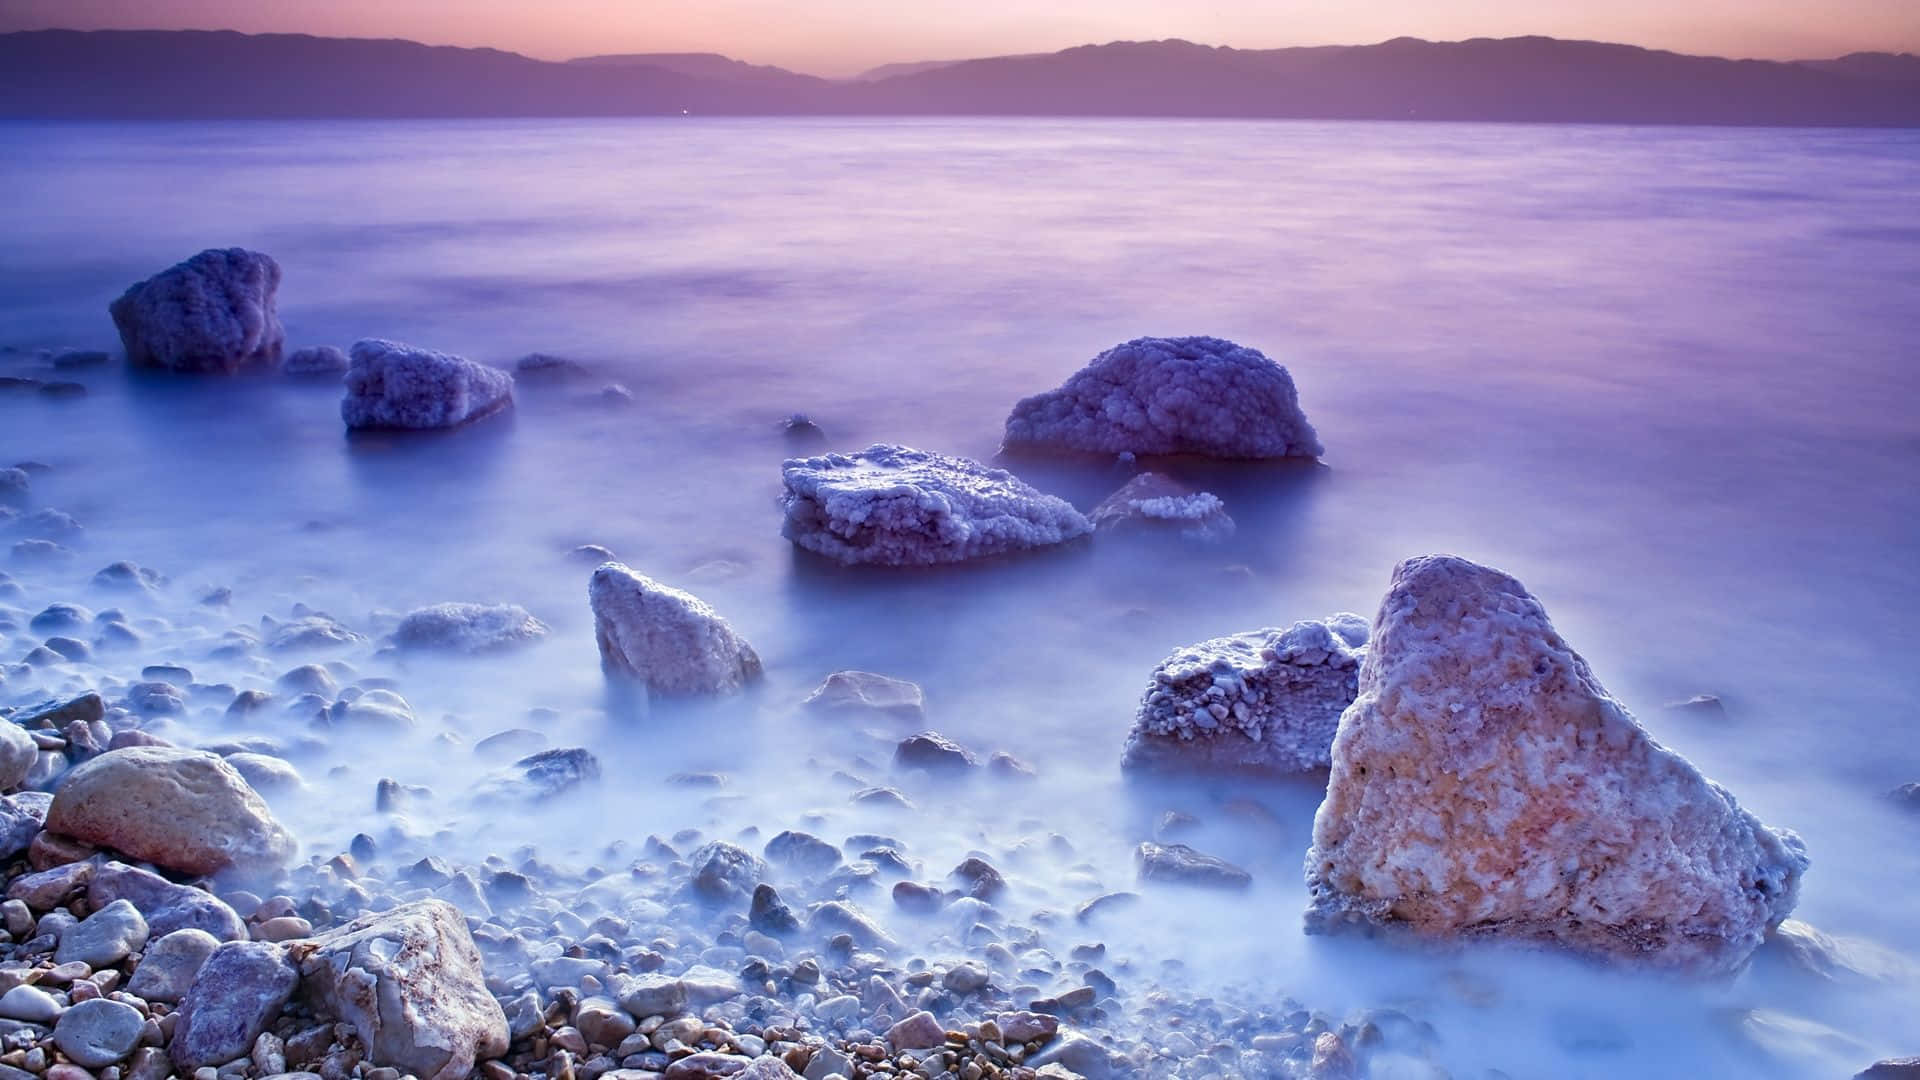 Mesmerizing Salt Formation Cloaked in Mist at the Dead Sea Wallpaper